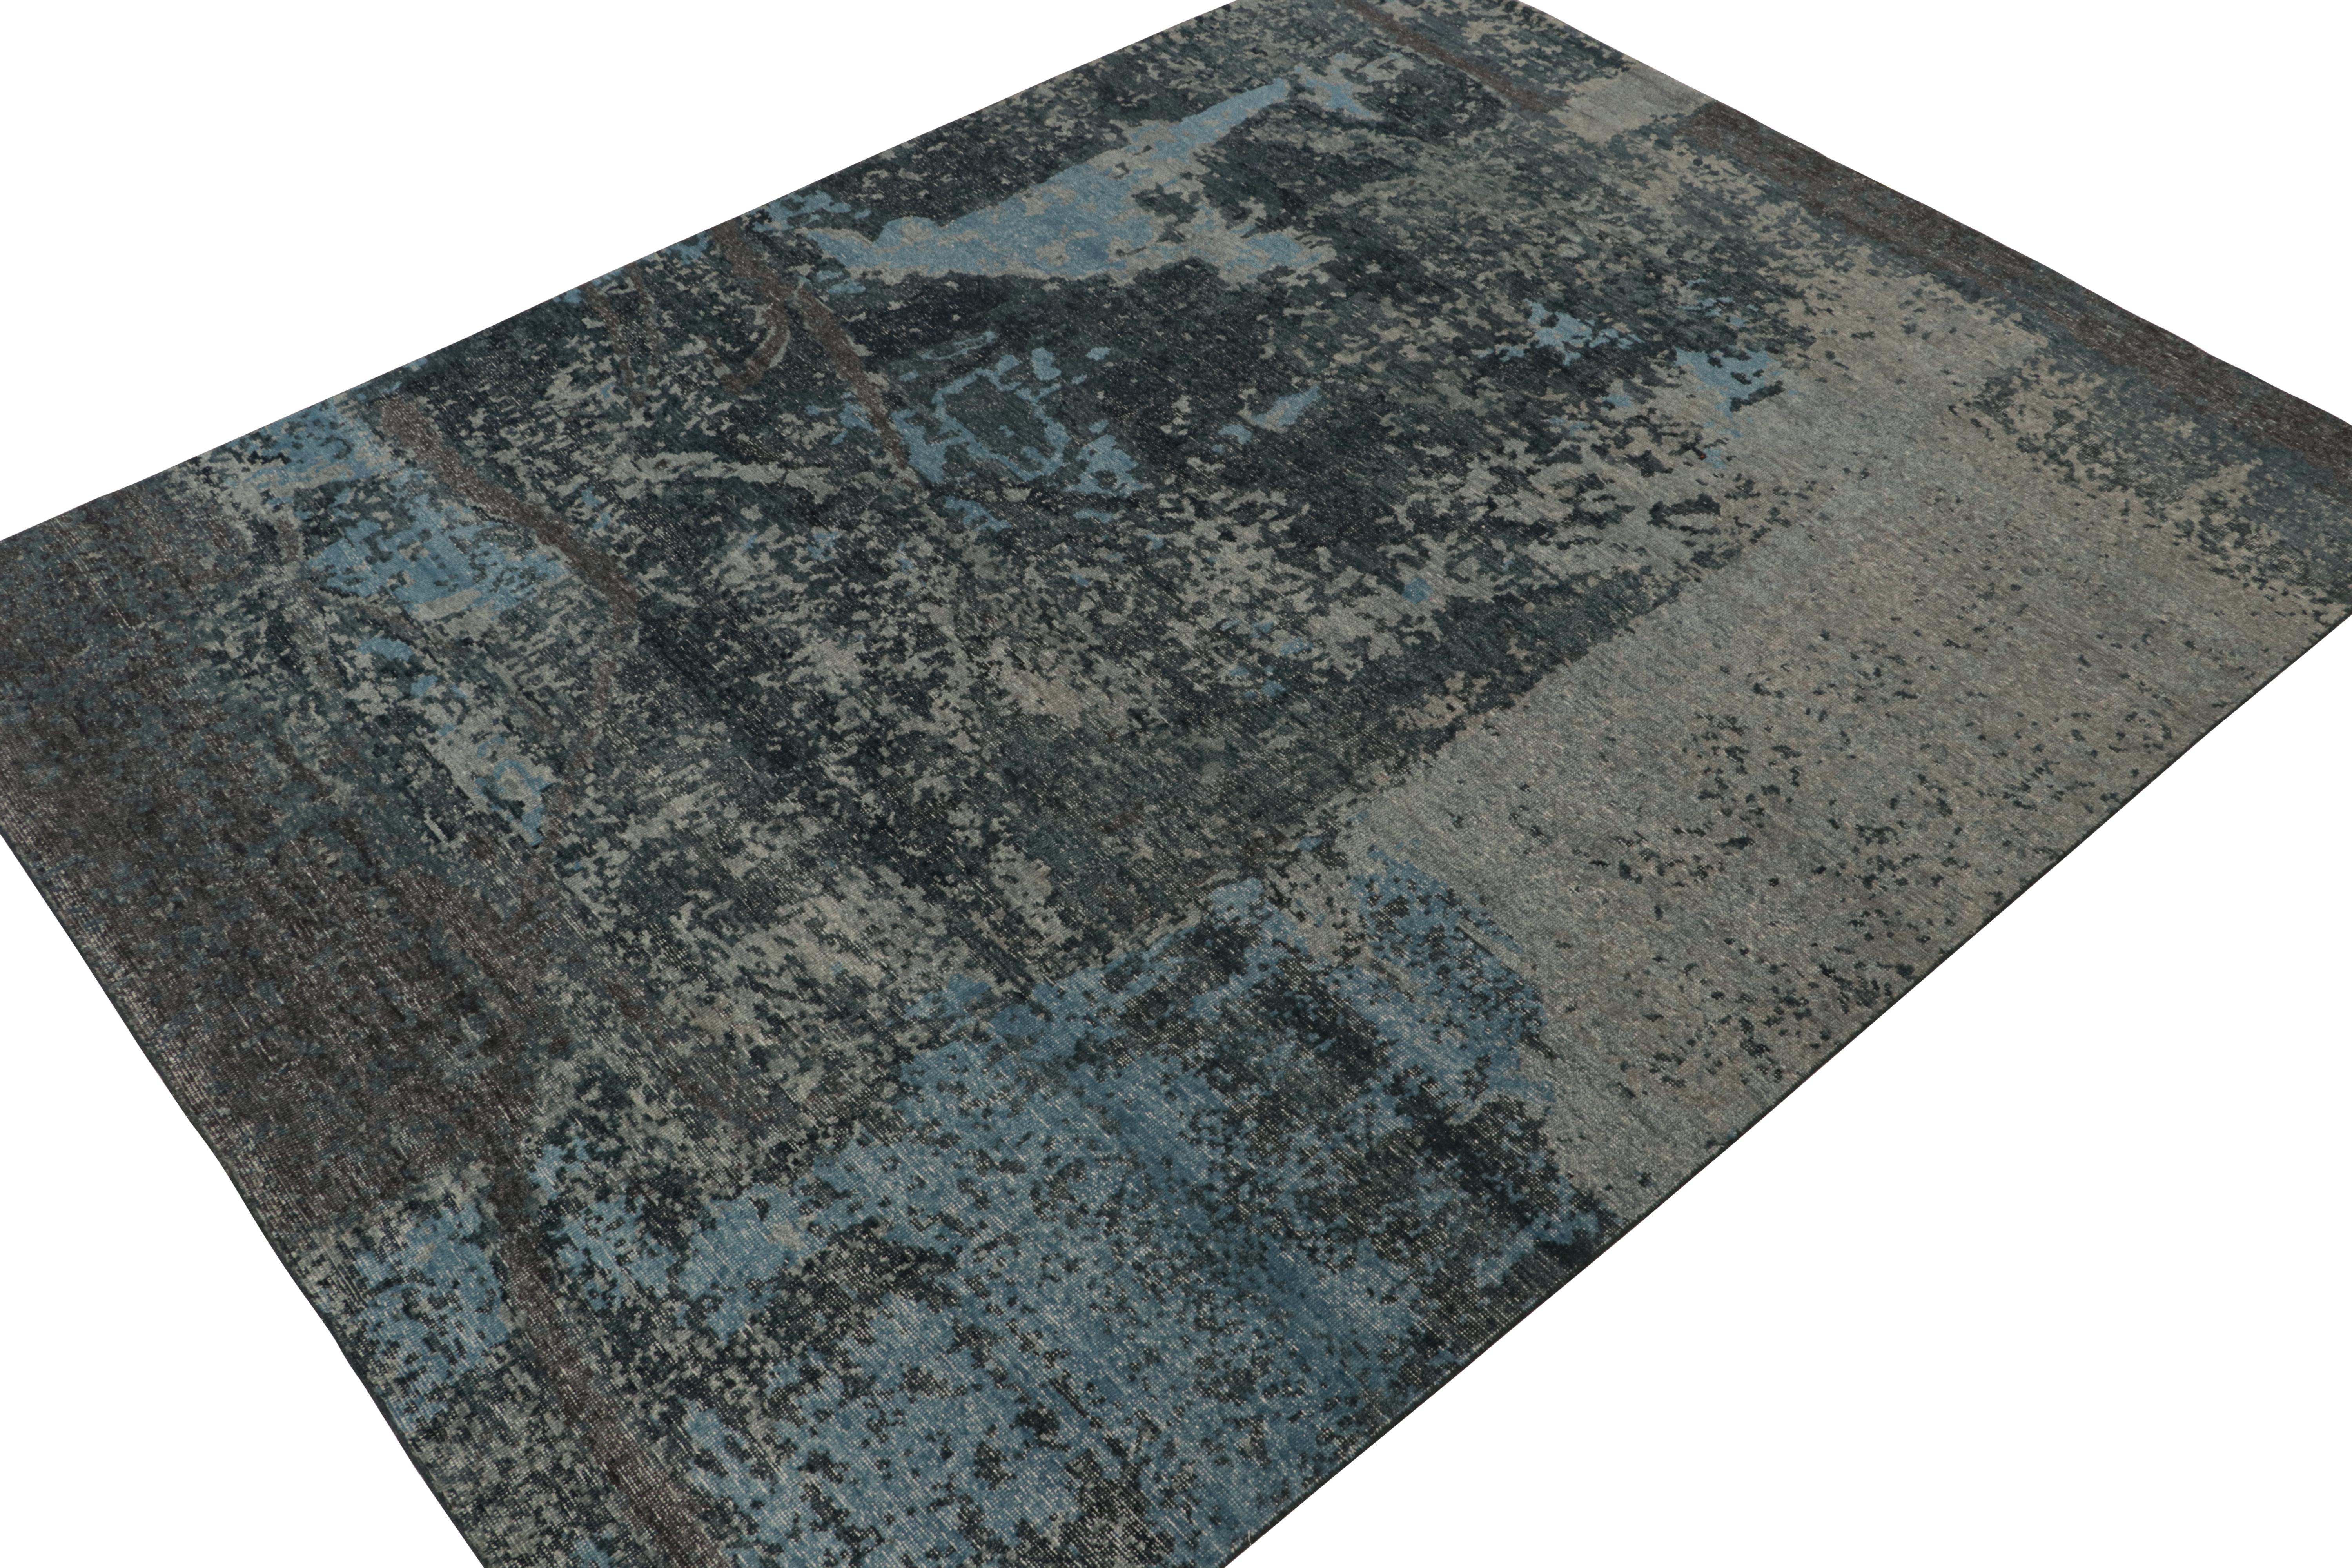 This contemporary 9x12 abstract rug is a new addition to the Homage Collection by Rug & Kilim.

Further On the Design:

Hand-knotted in wool and cotton, this design evokes a fluid play of blue and gray colors with a deft hand for detail. Keen eyes